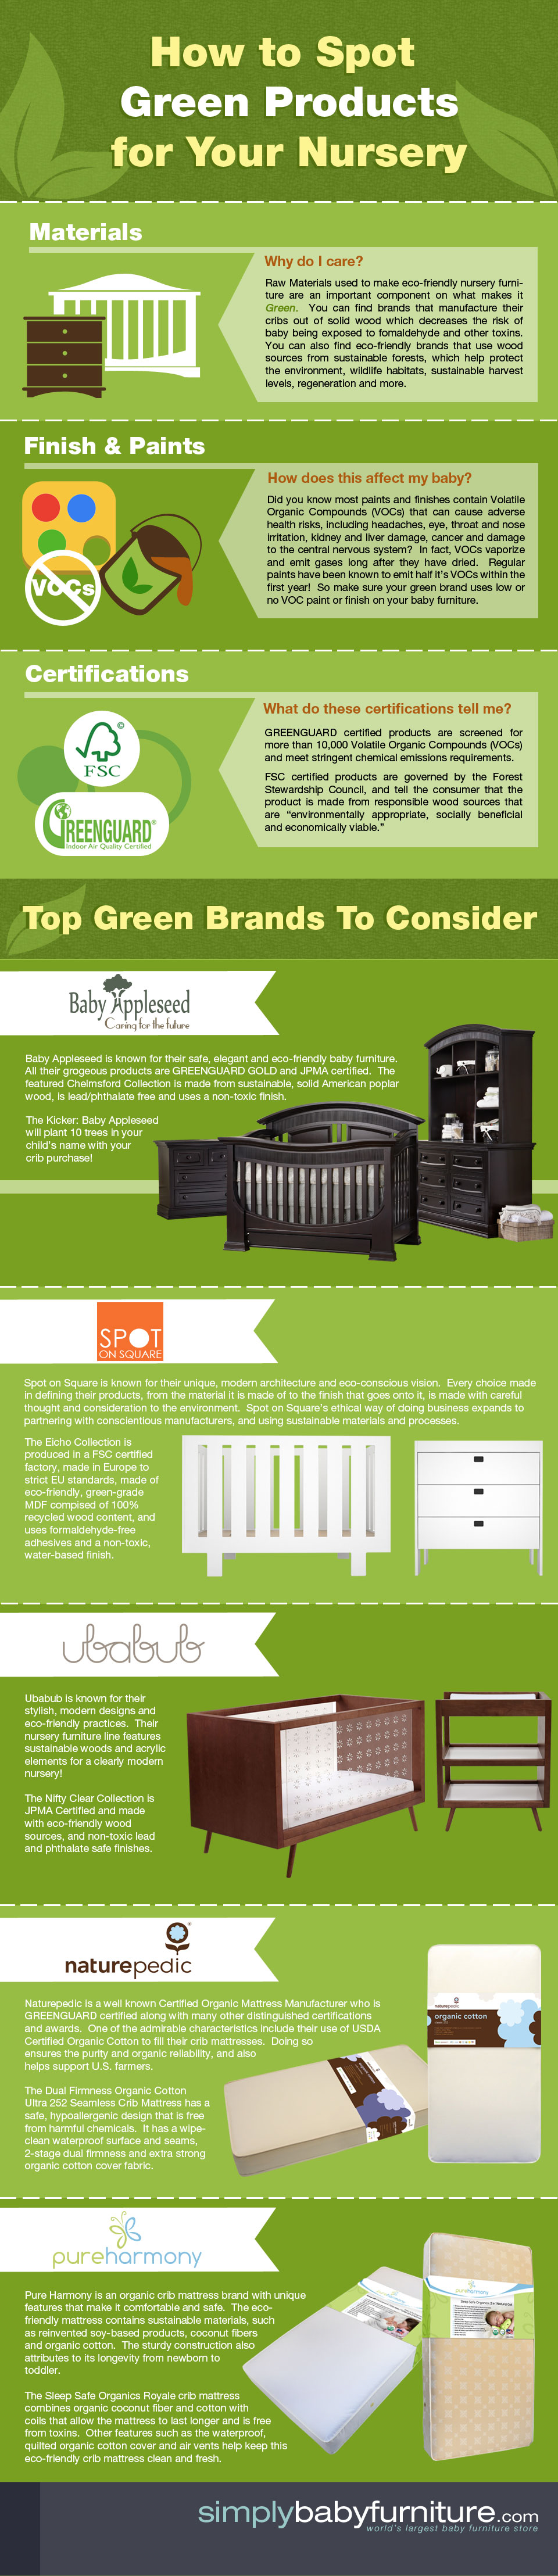 How-to-Spot-Green-Products-for-Your-Nursery